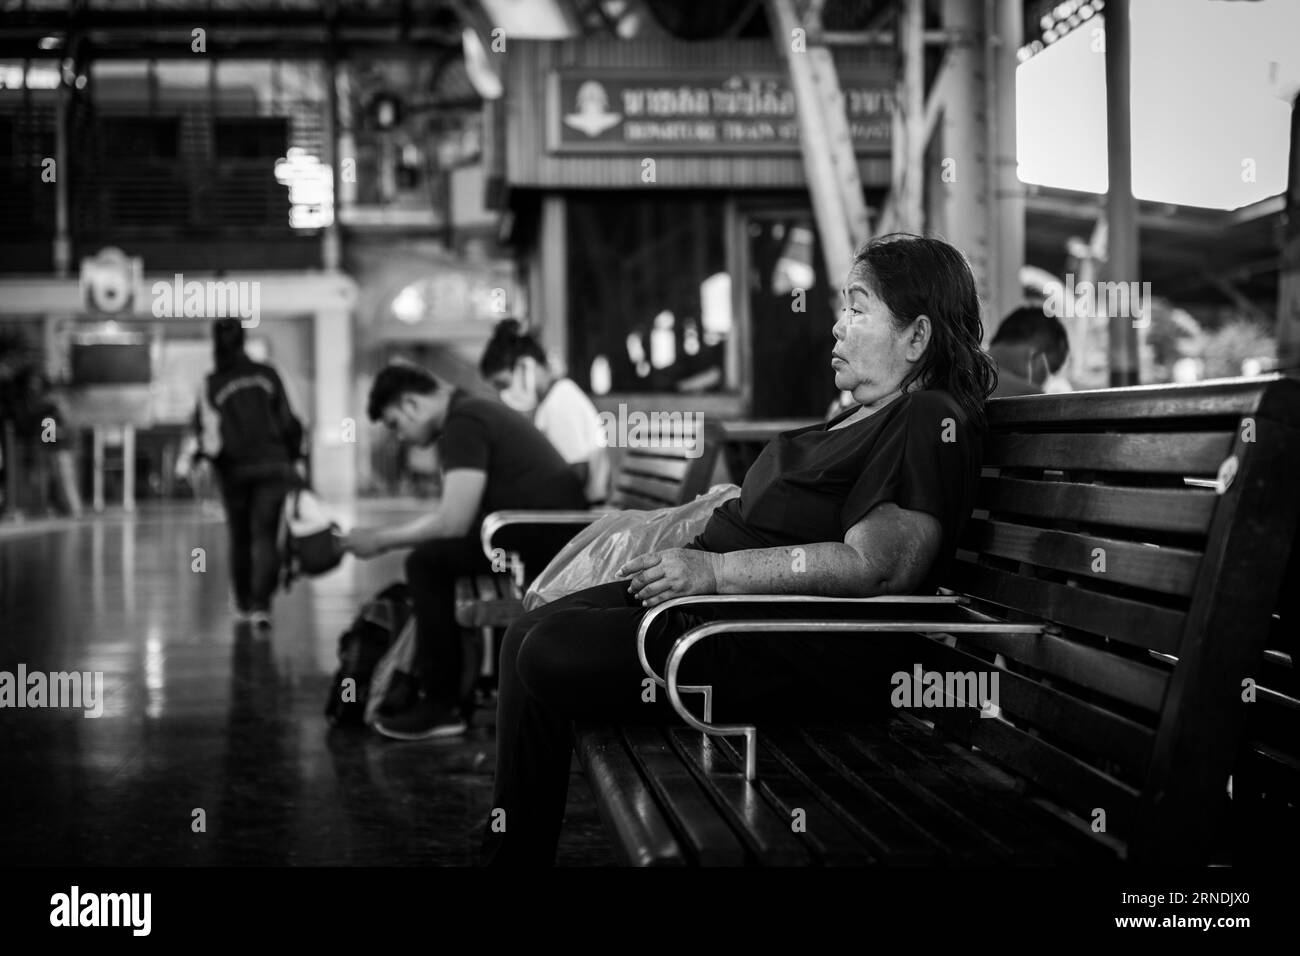 In this black and white photograph, an elderly Thai woman sits contemplatively on a waiting bench at Hua Lamphong Railway Station in Bangkok, Thailand Stock Photo